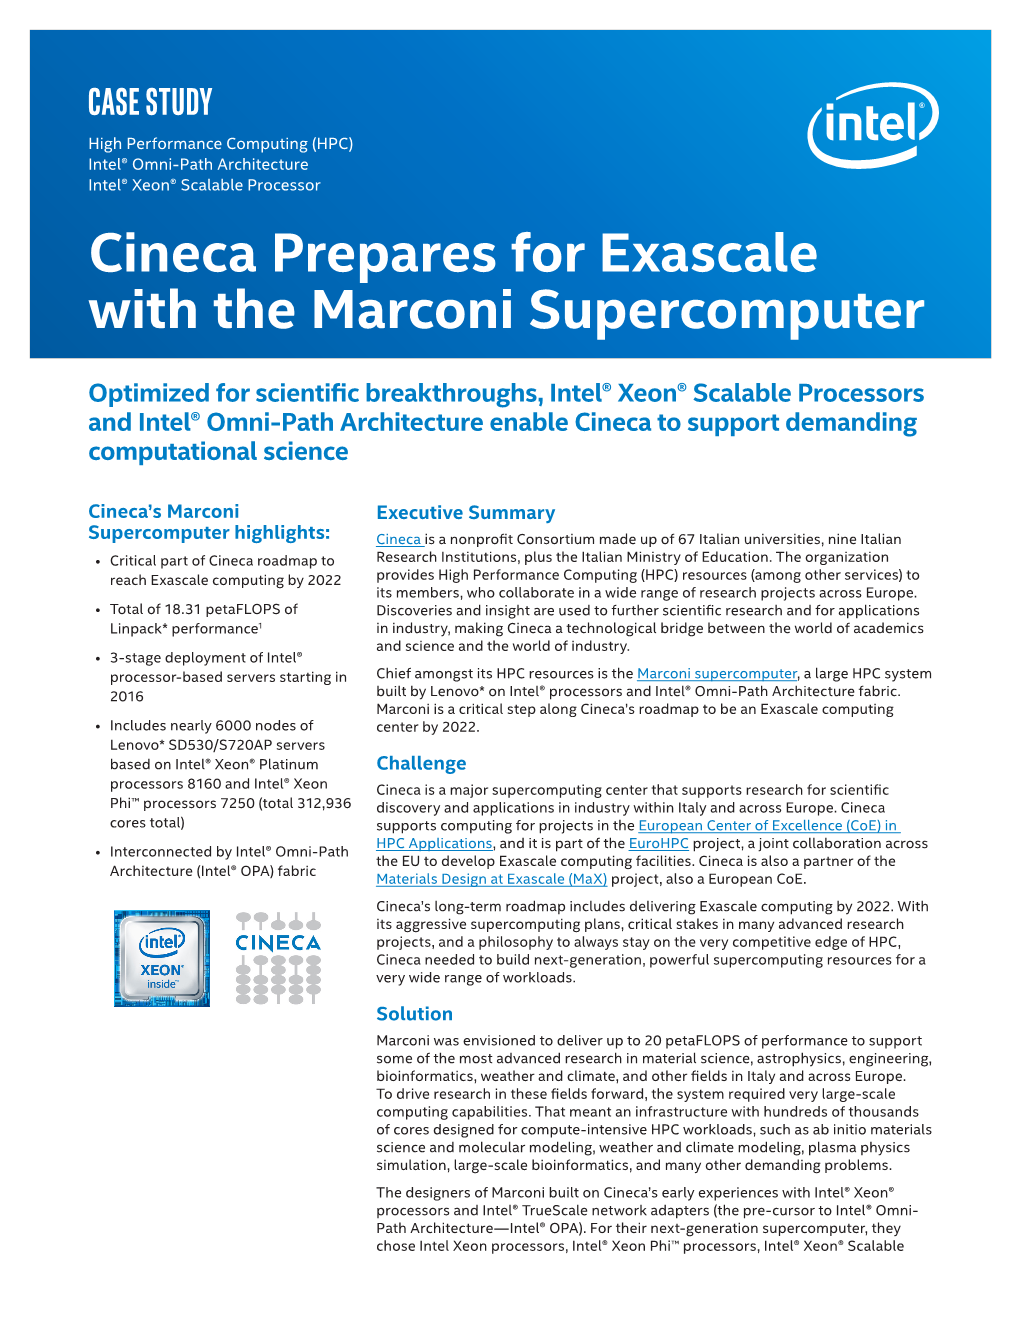 Cineca Prepares for Exascale with the Marconi* Supercomputer